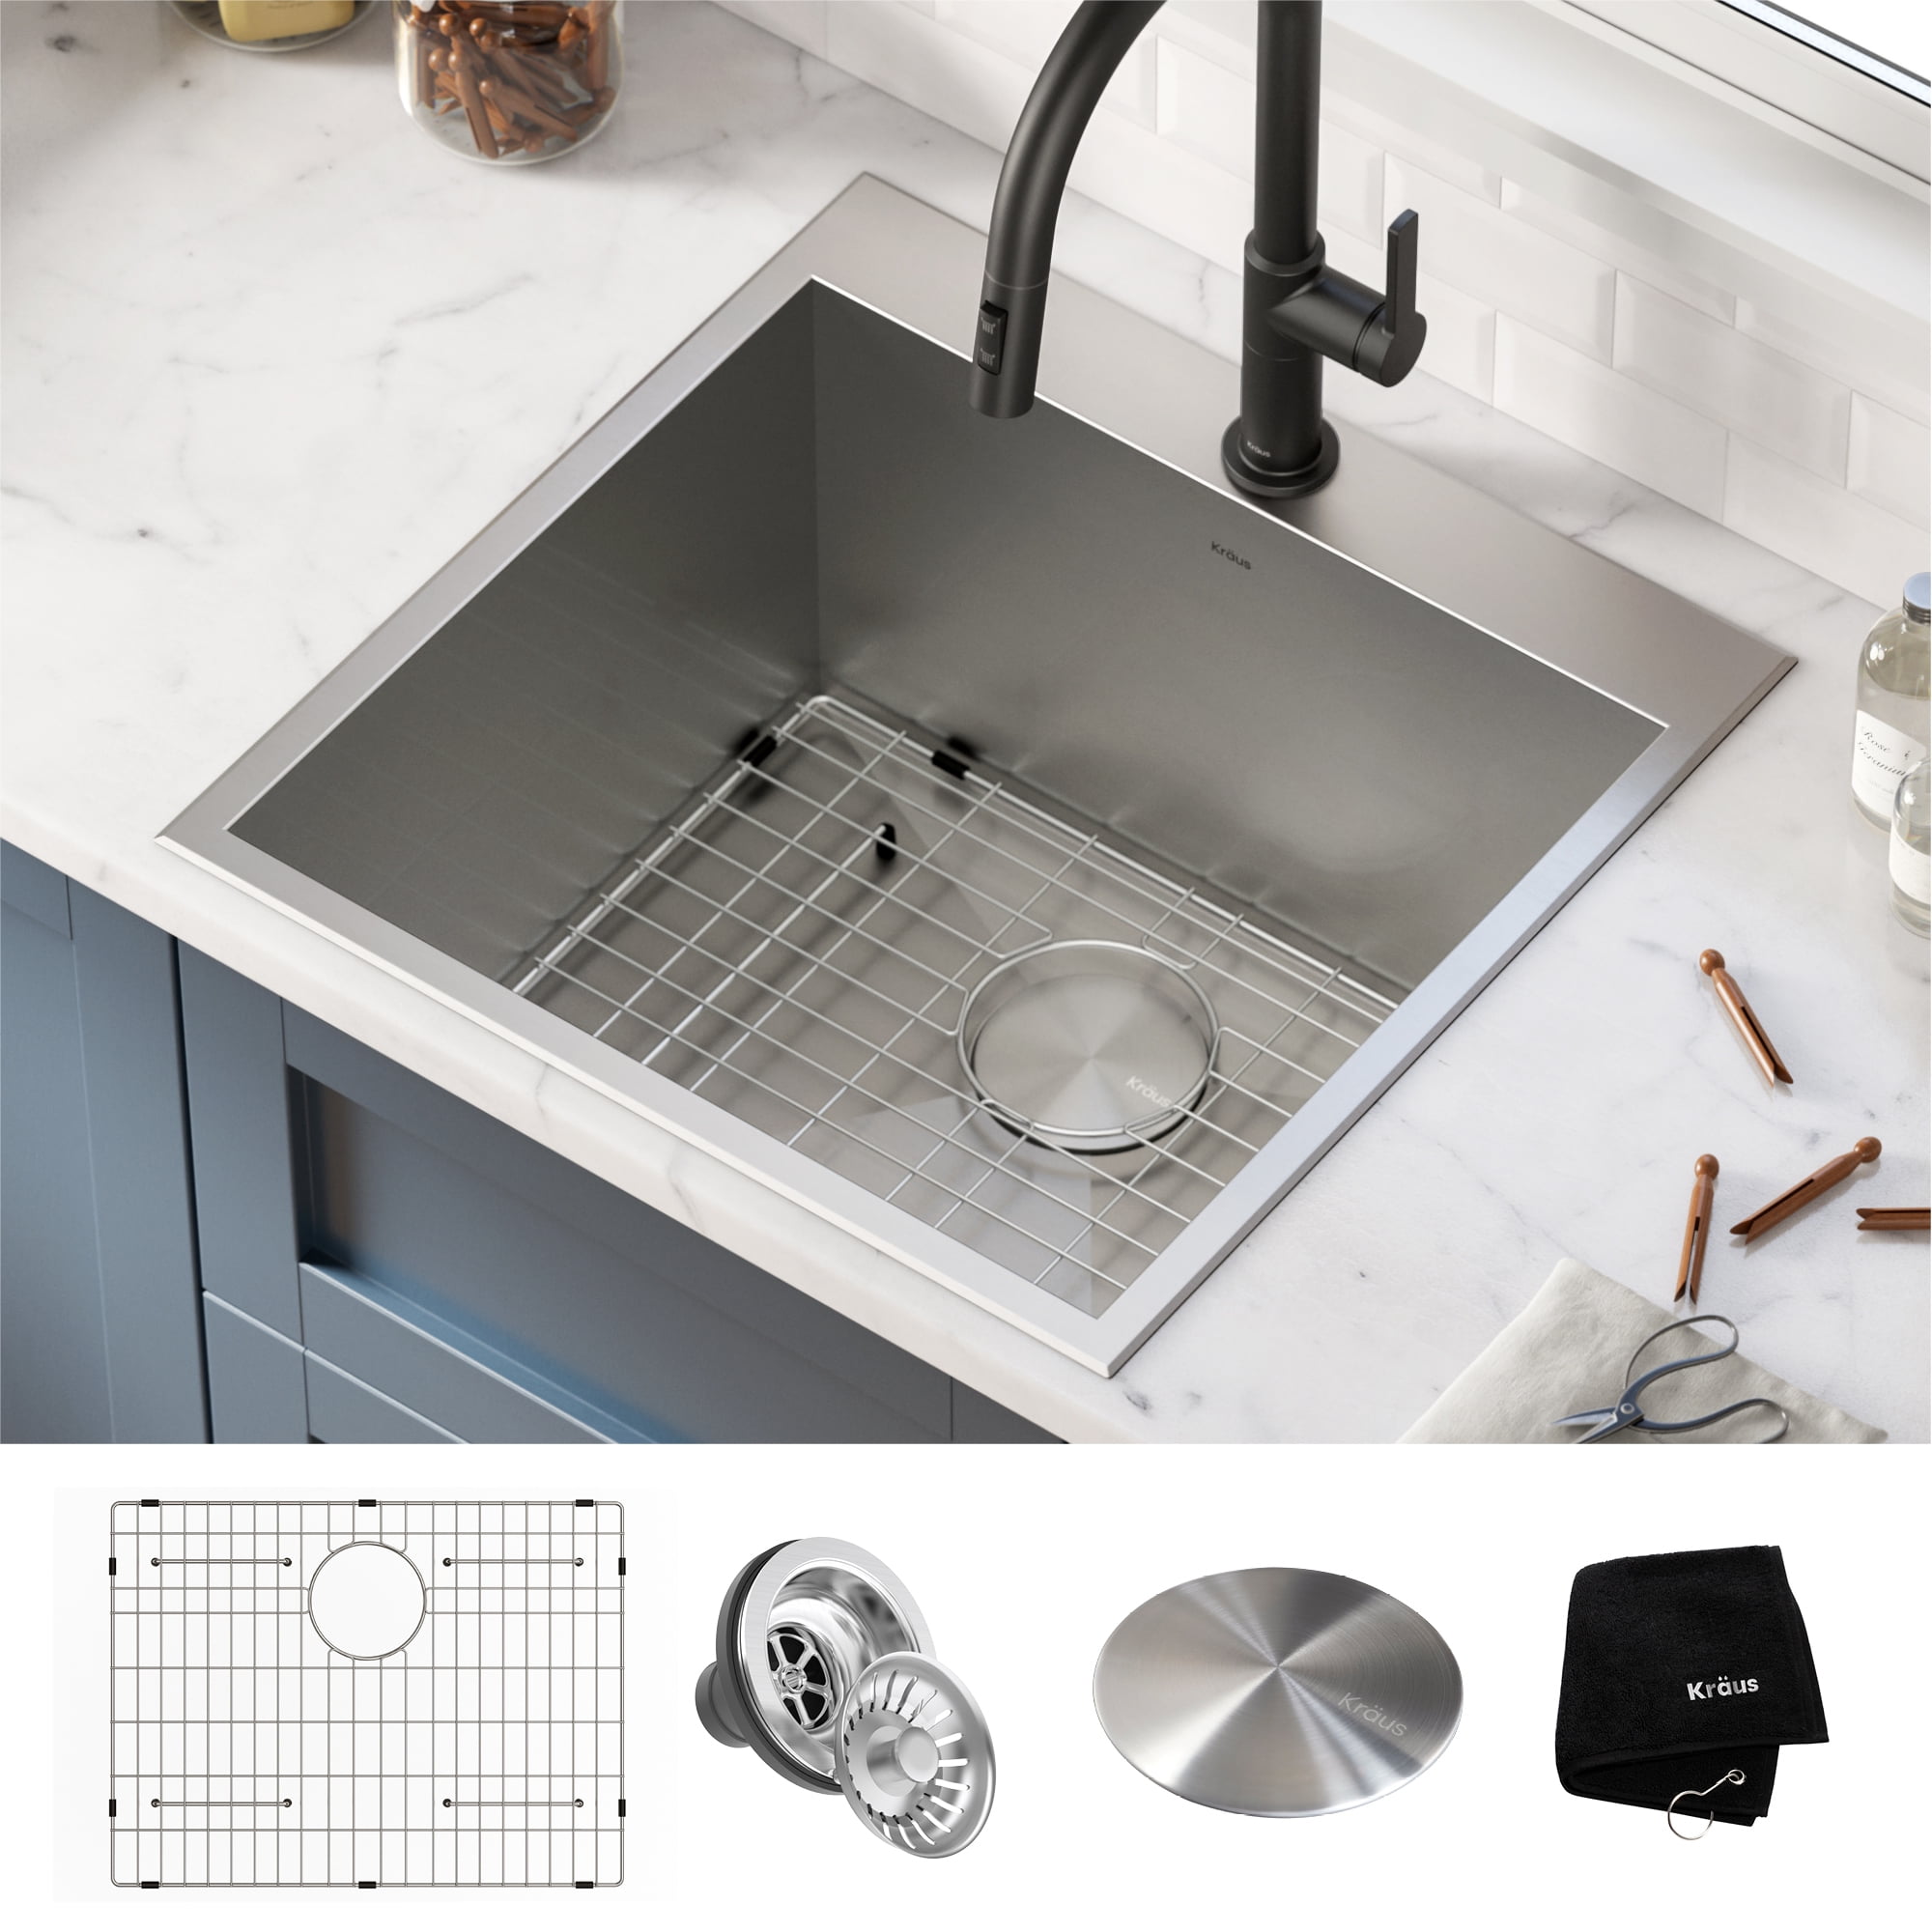 JJZXD Laundry Tub Balcony Household Stainless Steel Laundry Sink with Washboard One-Piece Large Made Kitchen Sink